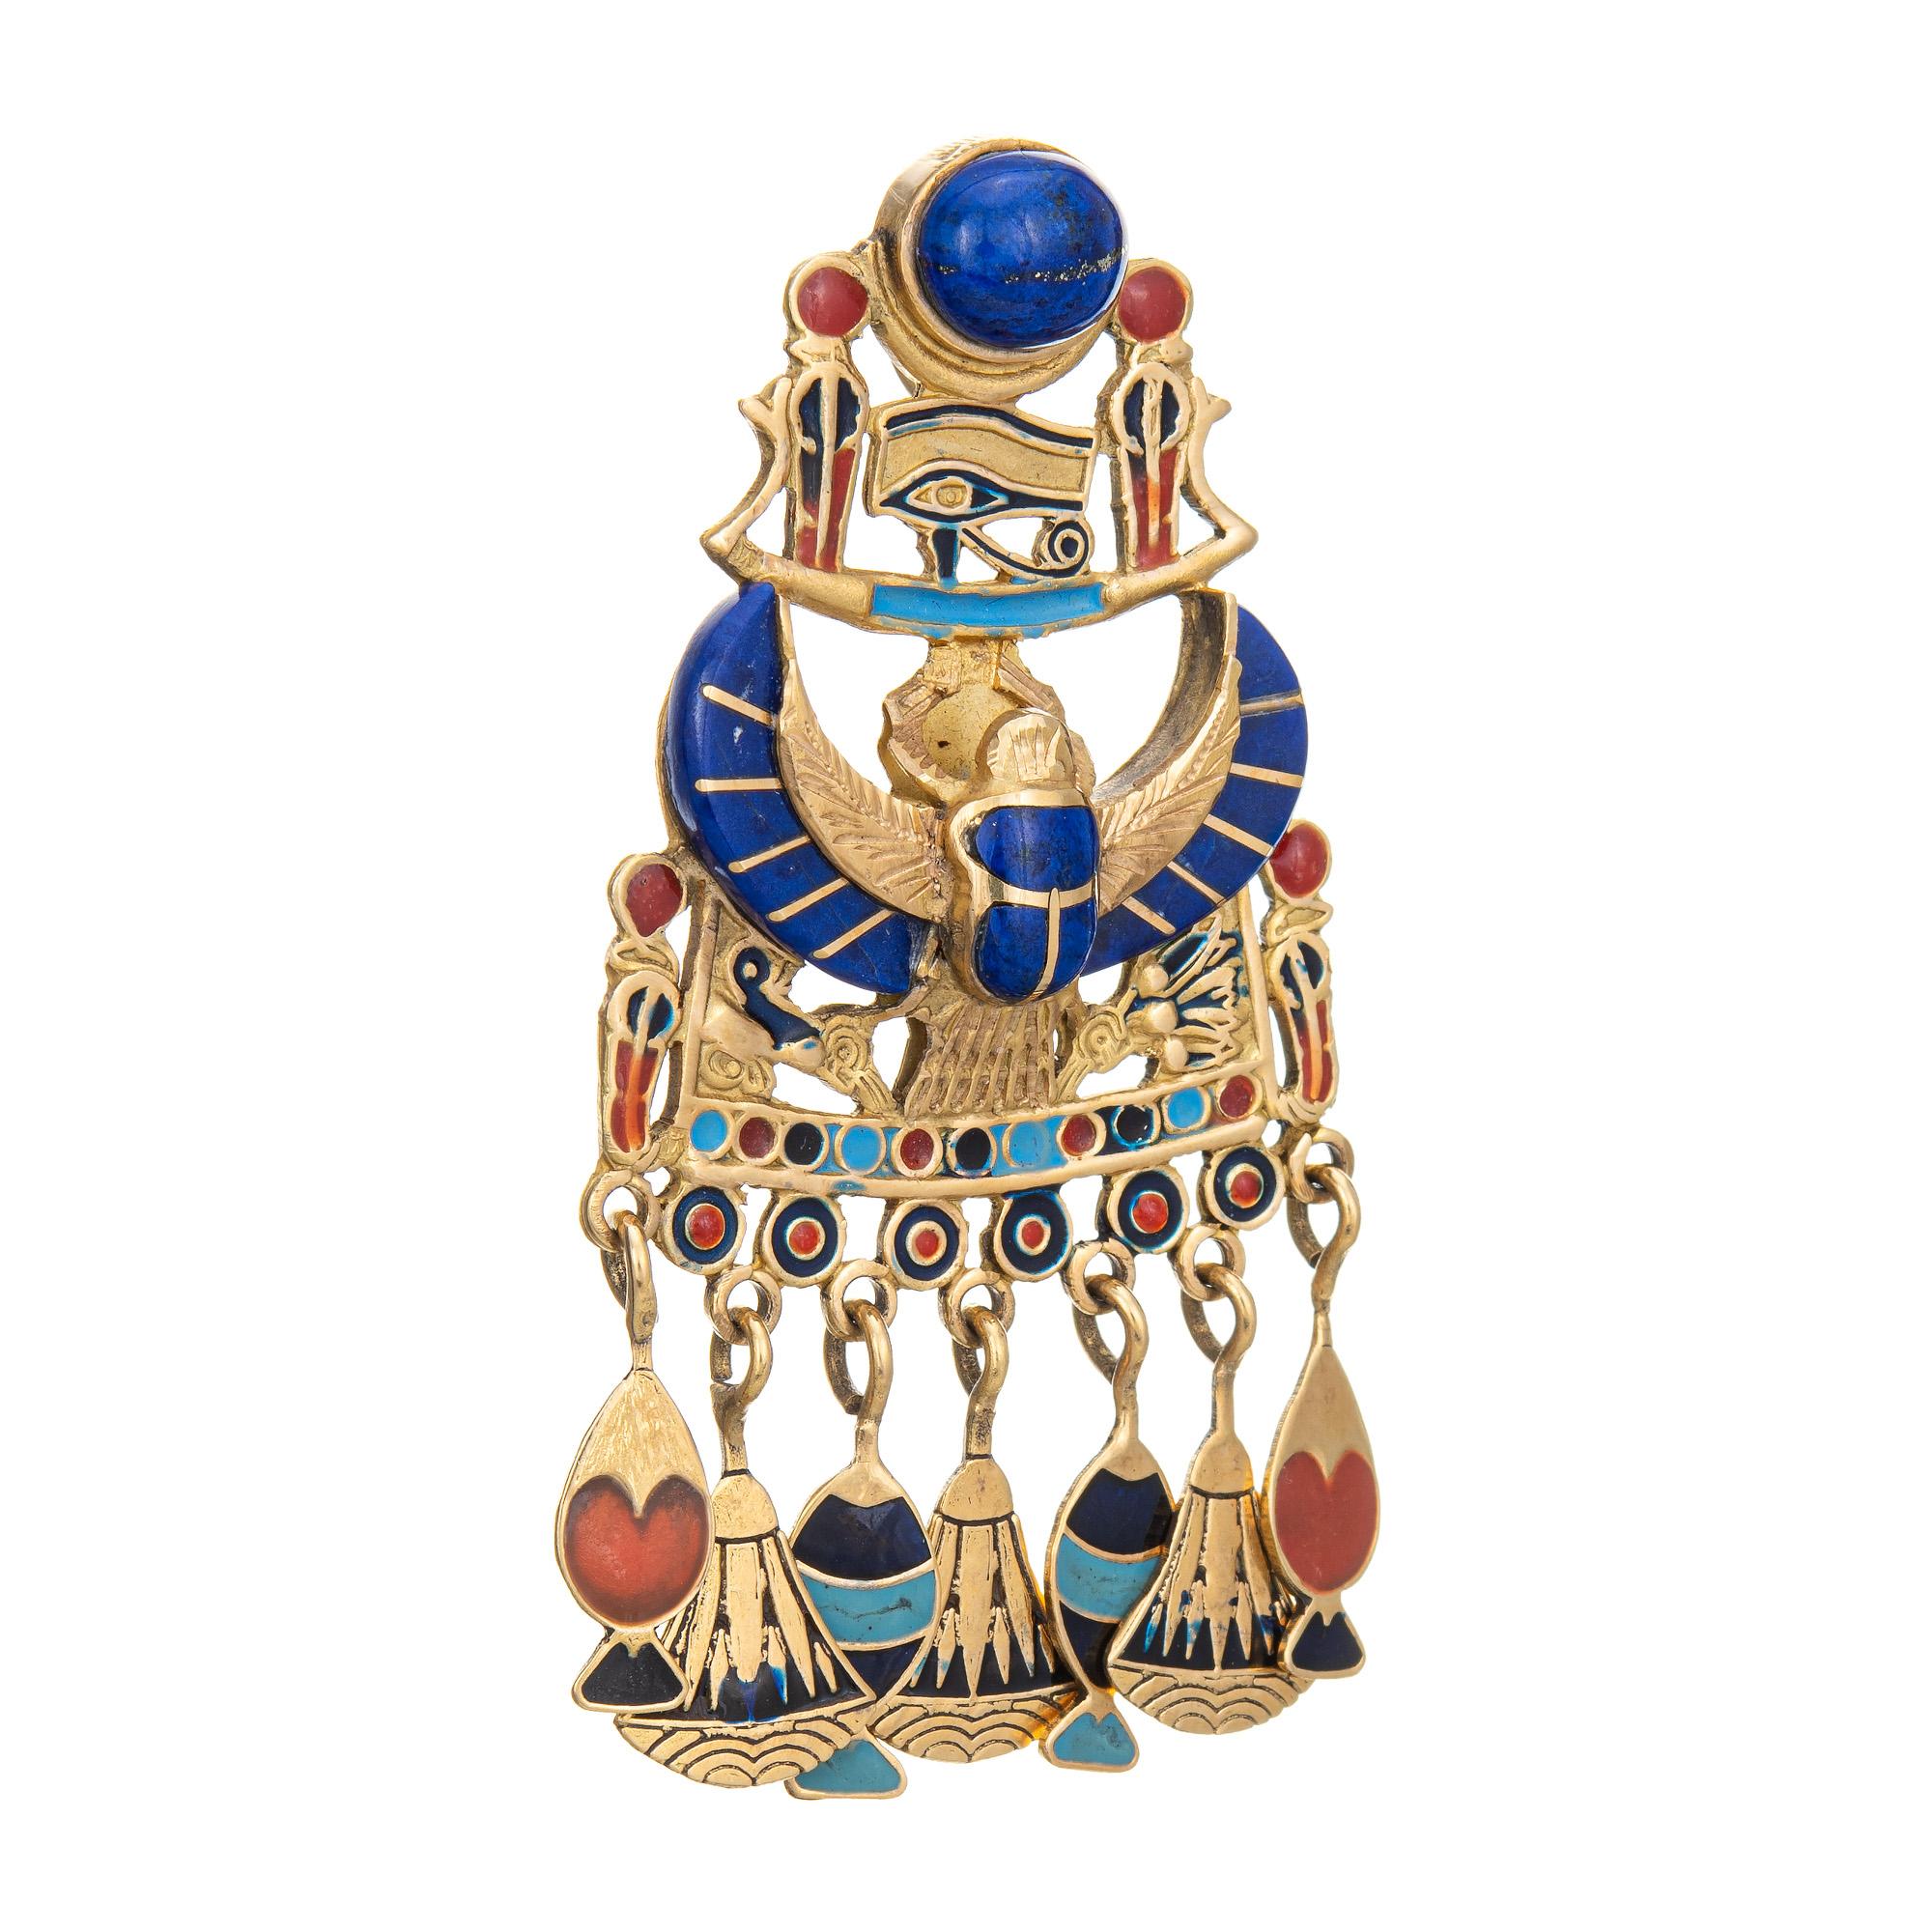 Finely detailed Egyptian pendant (circa 1960s to 1970s), crafted in 18 karat yellow gold. 

Lapis lazuli measures 9mm x 7mm (in very good condition and free or cracks or chips).

The elaborate pendant is beautifully detailed with various Egyptian